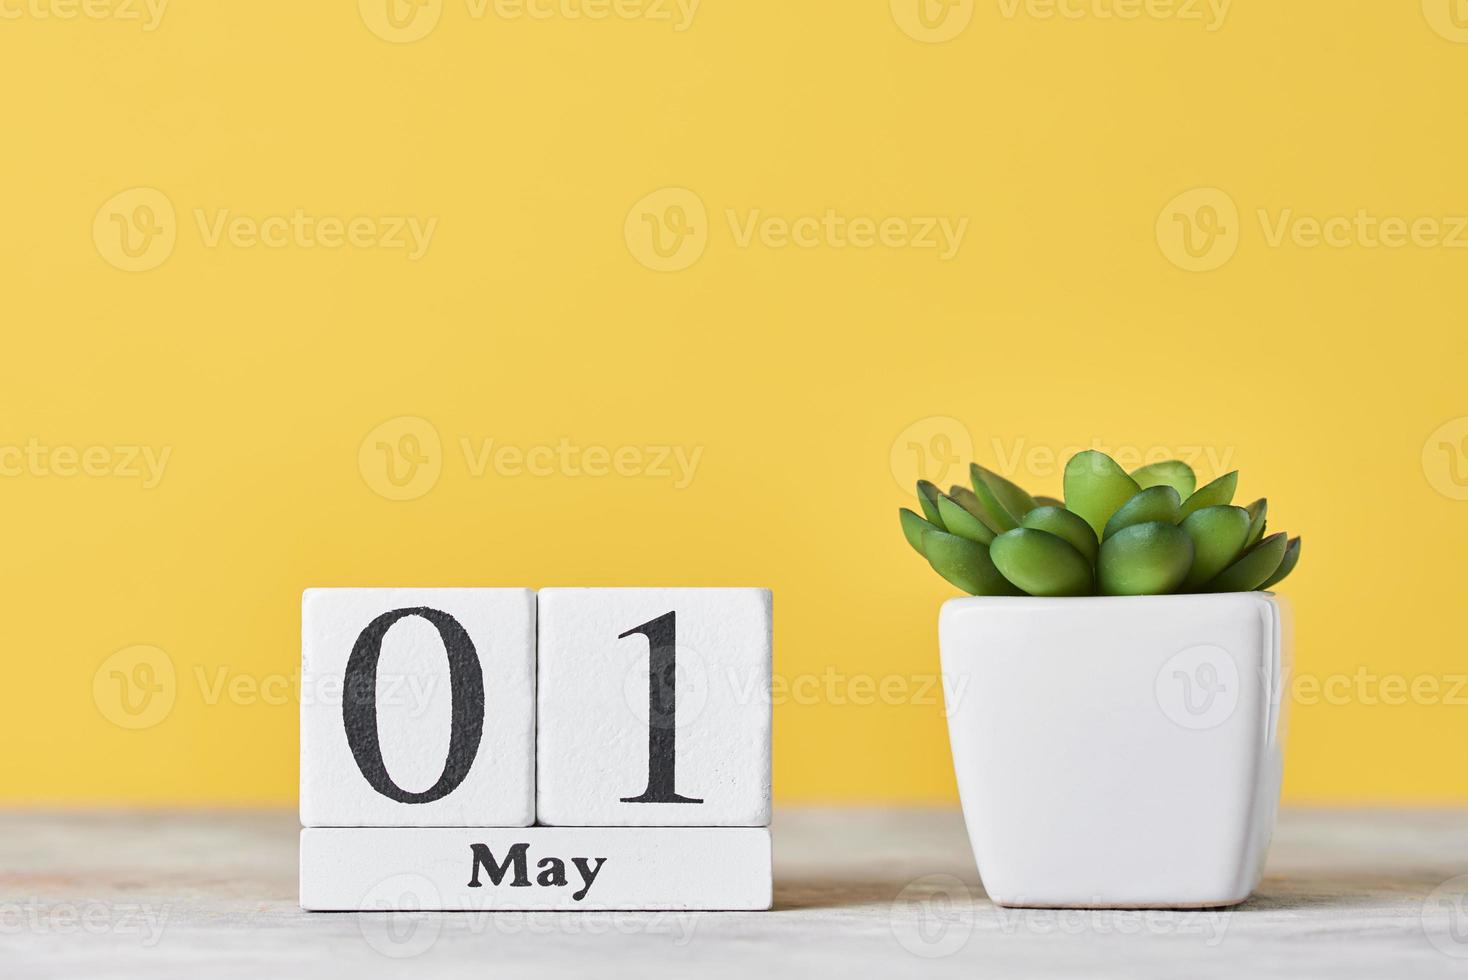 Wooden block calendar with date May 1 and succulent plant on yellow background photo